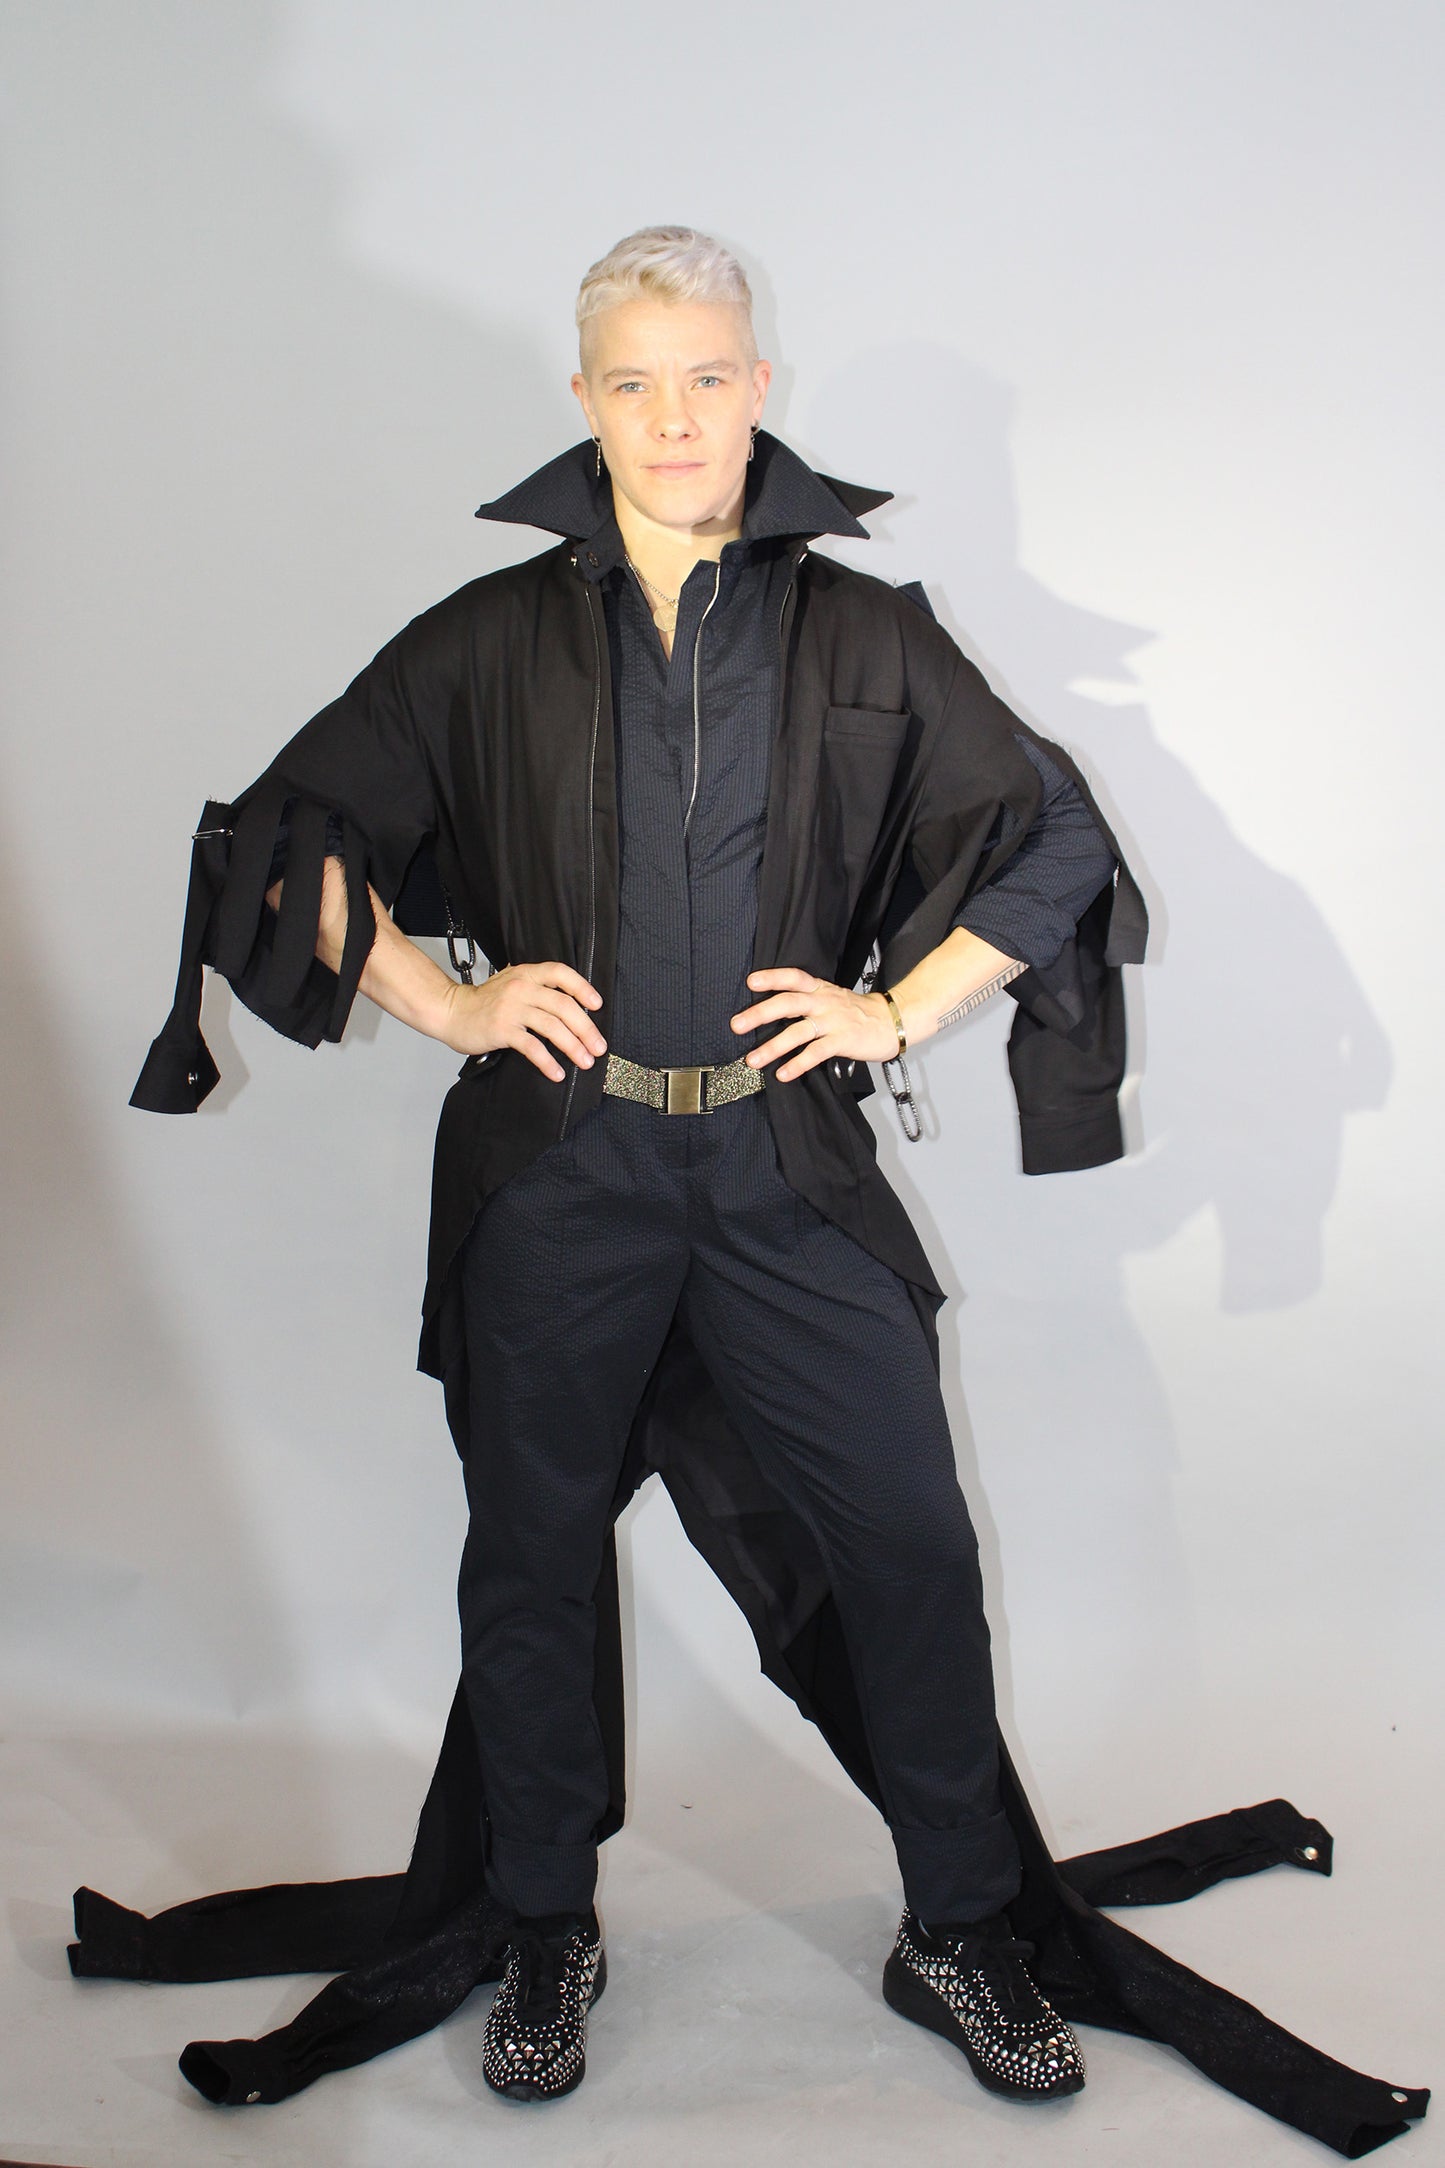 The Feminine WILDE Jumpsuit - Long Sleeve in Black Seersucker with Up-cycled "WOW" Tailcoat